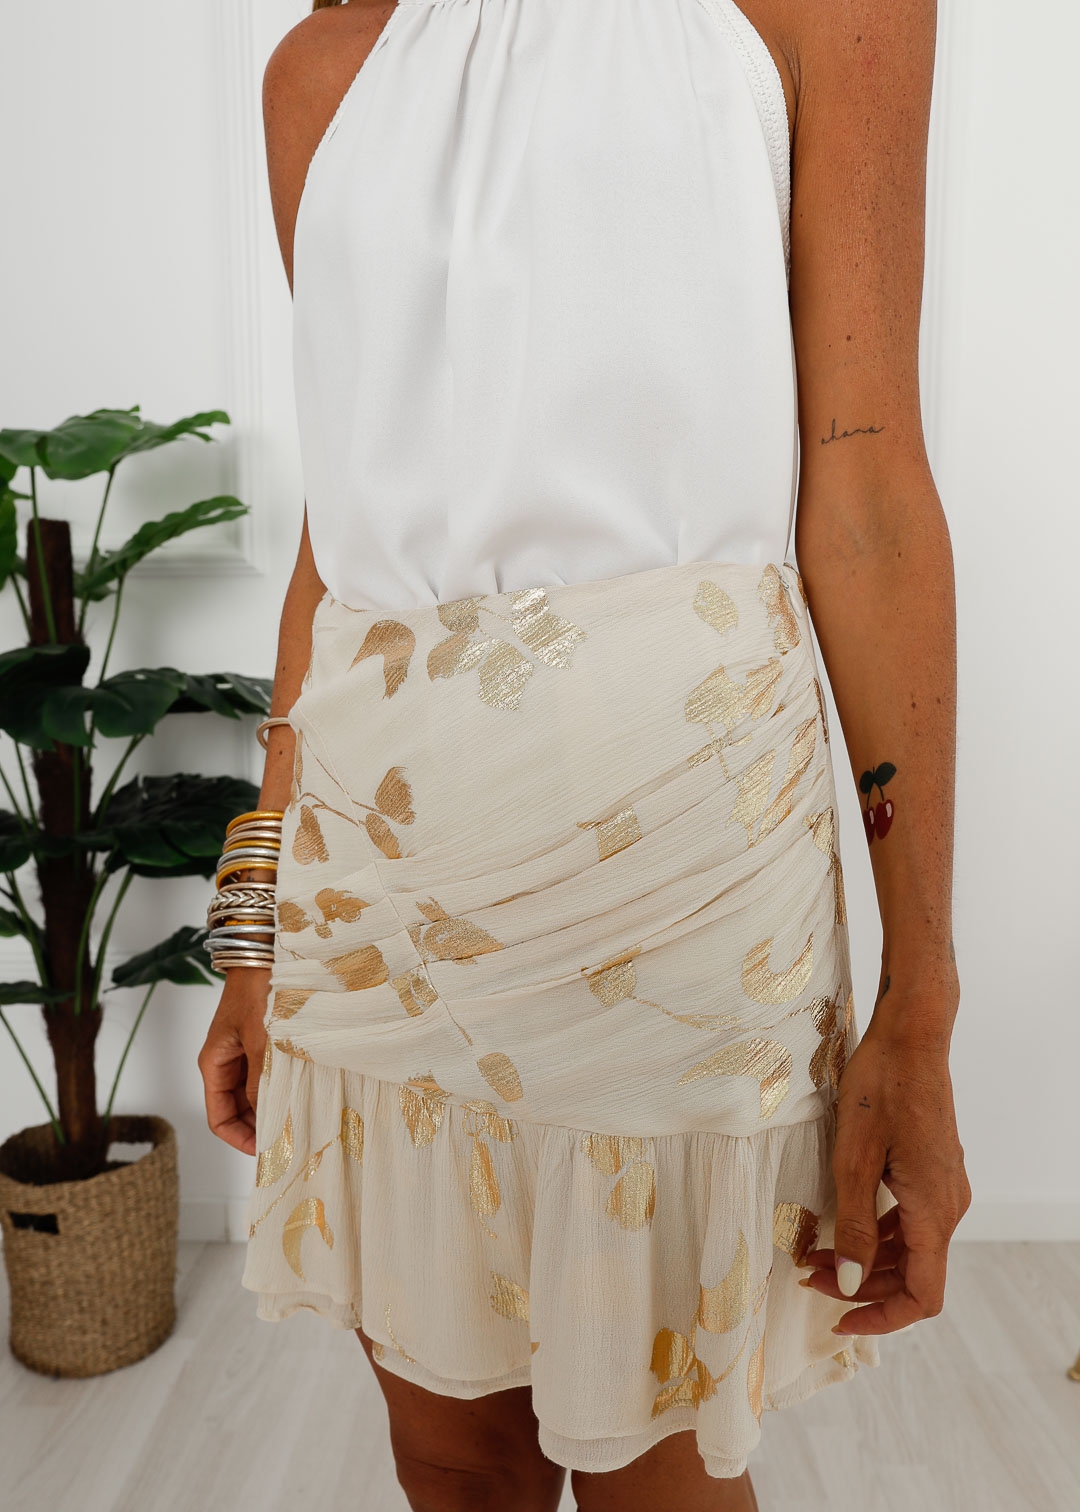 BEIGE SKIRT WITH GOLD DETAILS